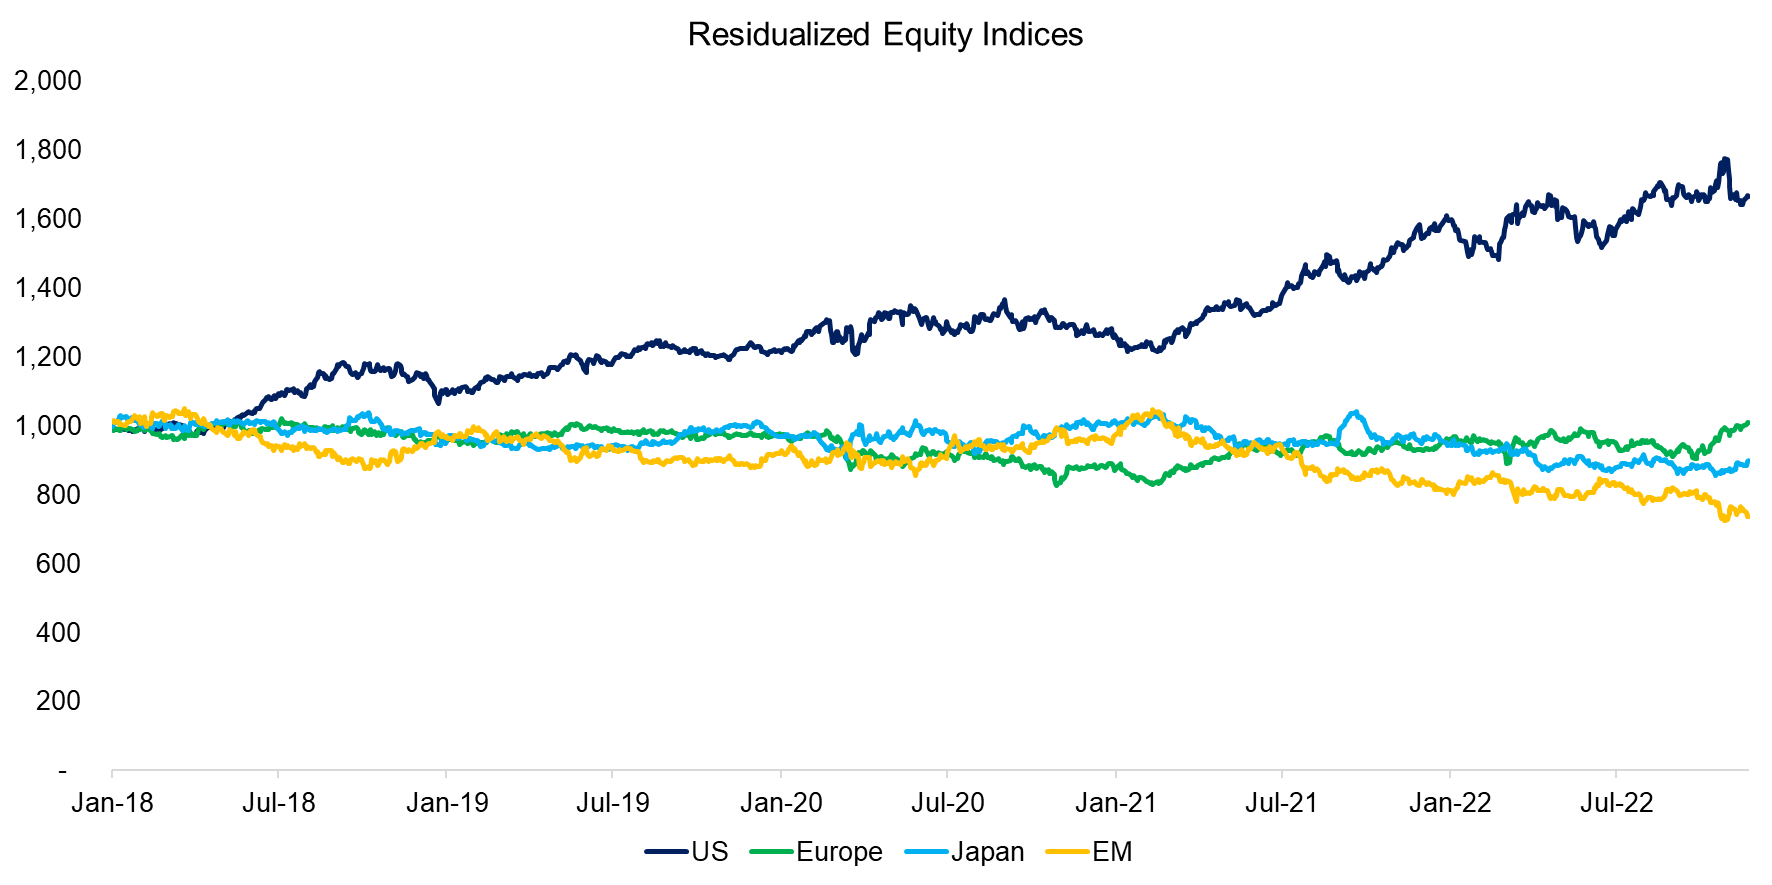 Residualized Equity Indices